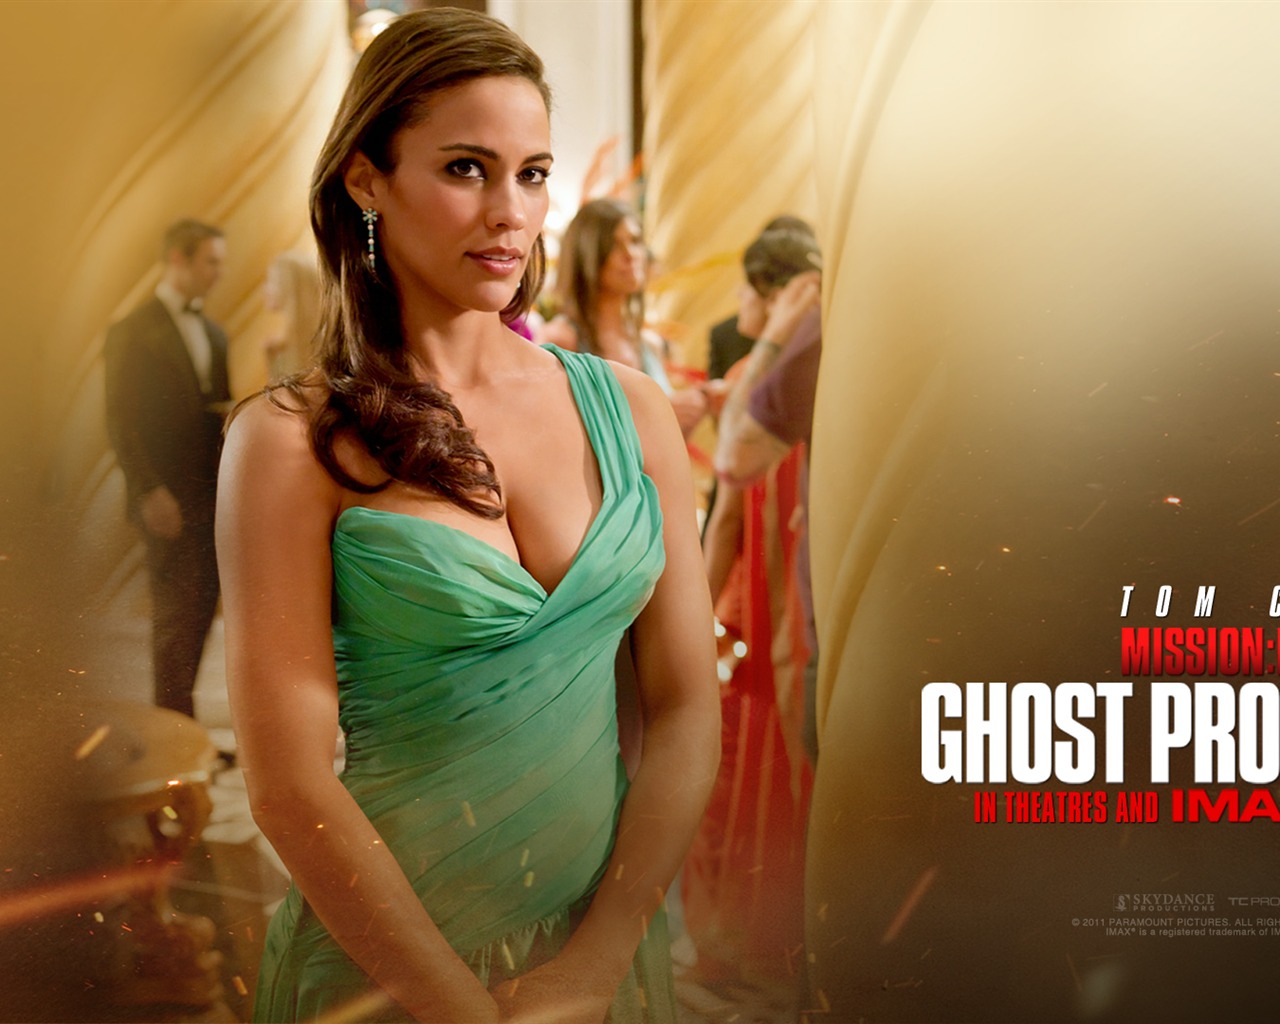 Mission: Impossible - Ghost Protocol wallpapers HD #7 - 1280x1024